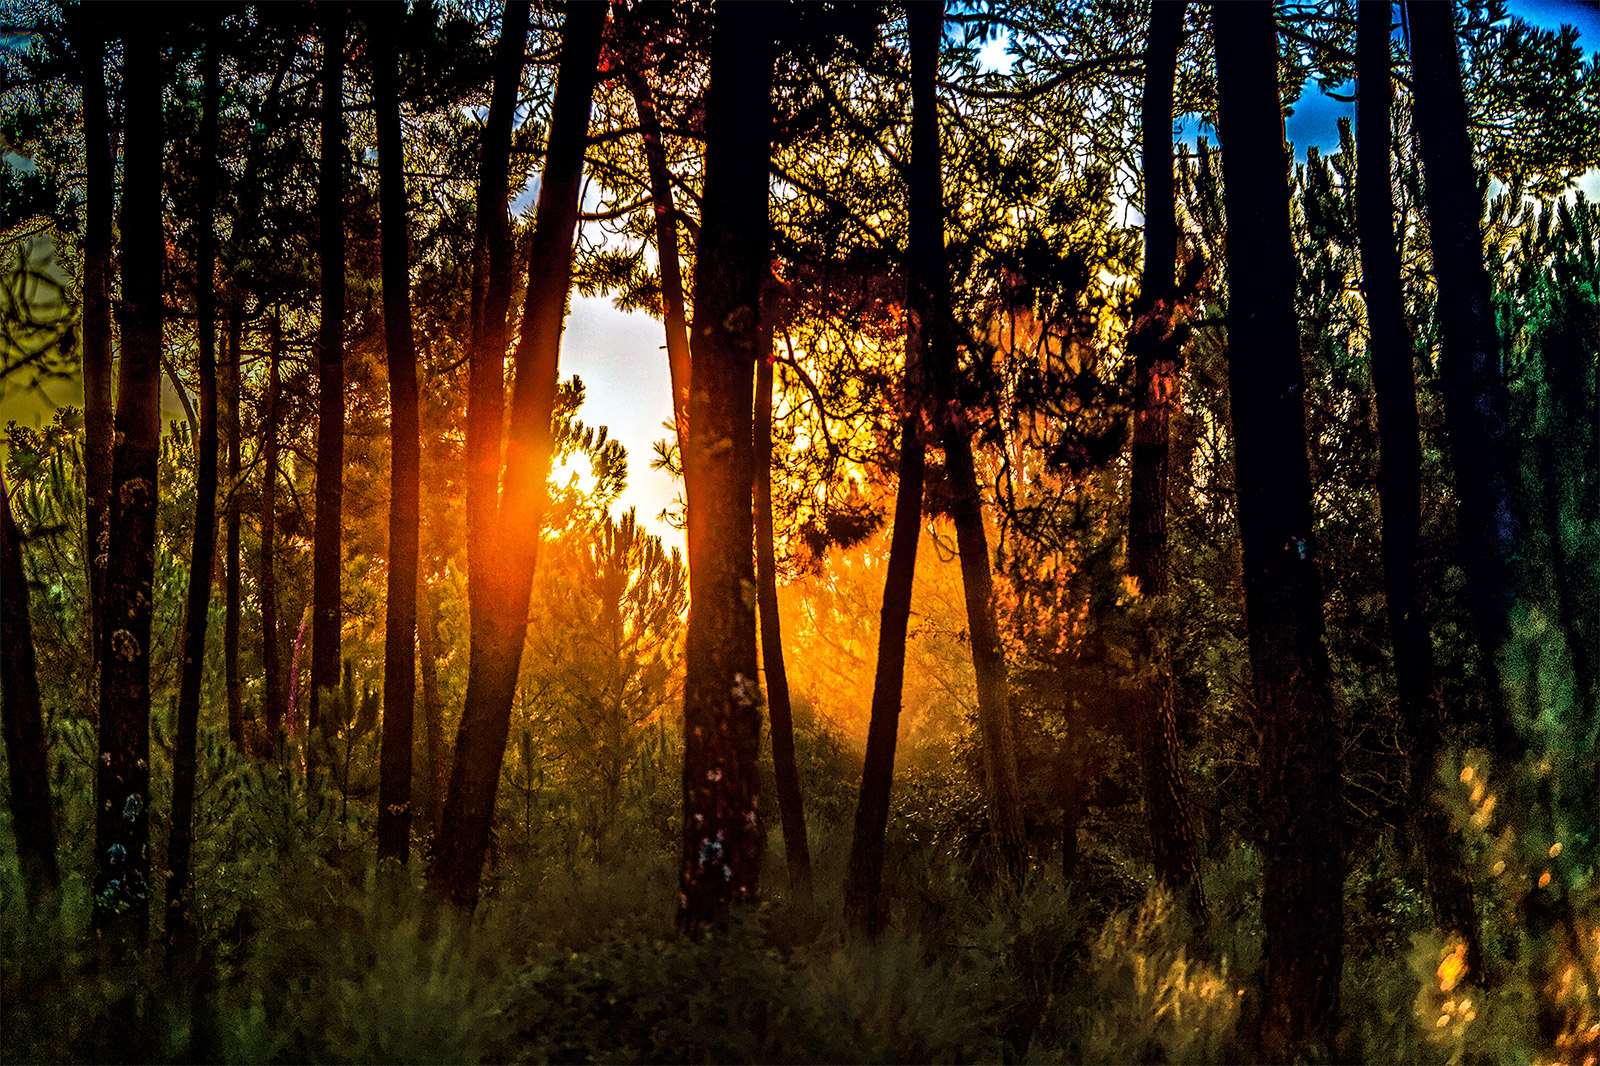 Sunset over the forests